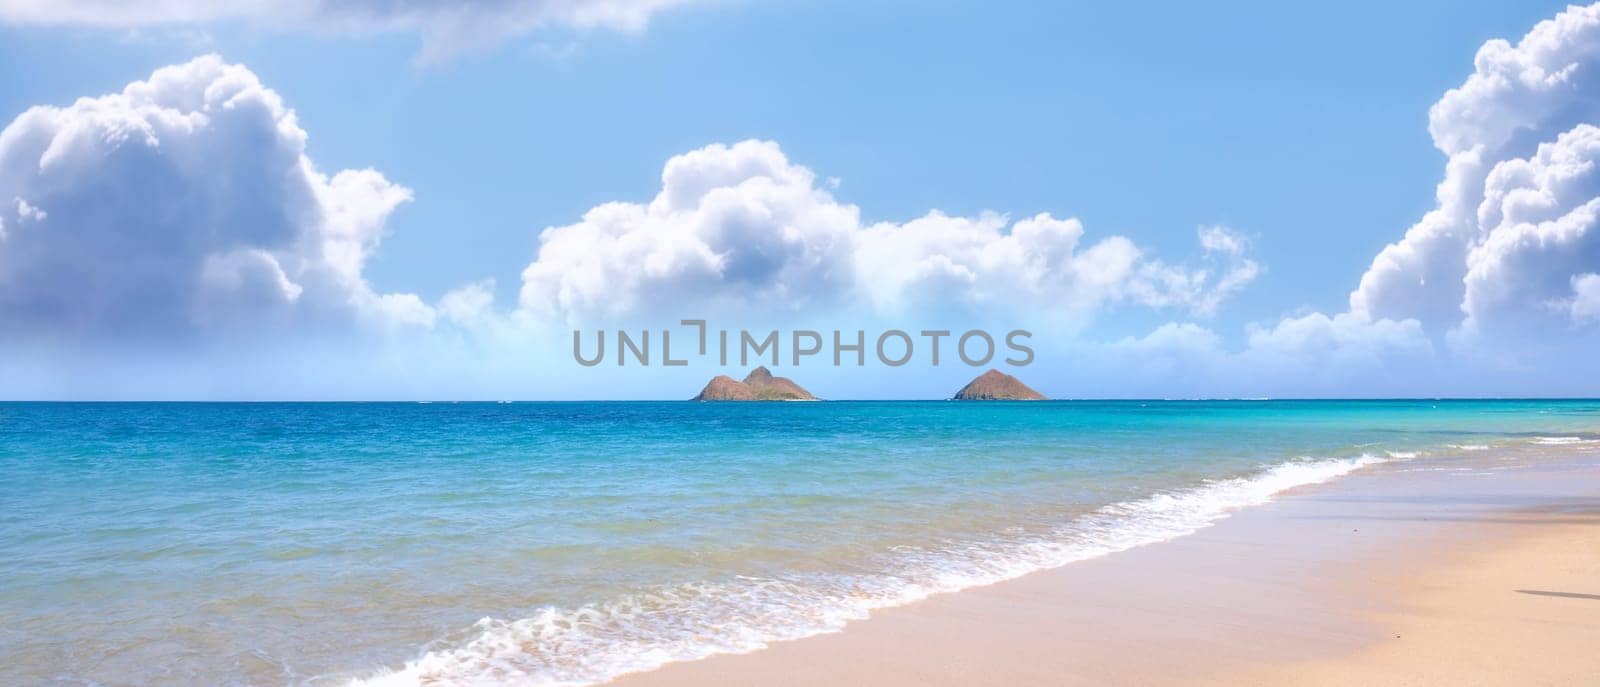 Beach, water and ocean landscape with clouds in the sky or travel to a tropical paradise, dream vacation or island holiday, Hawaii, summer wallpaper and relax in nature, sun and blue sea waves.